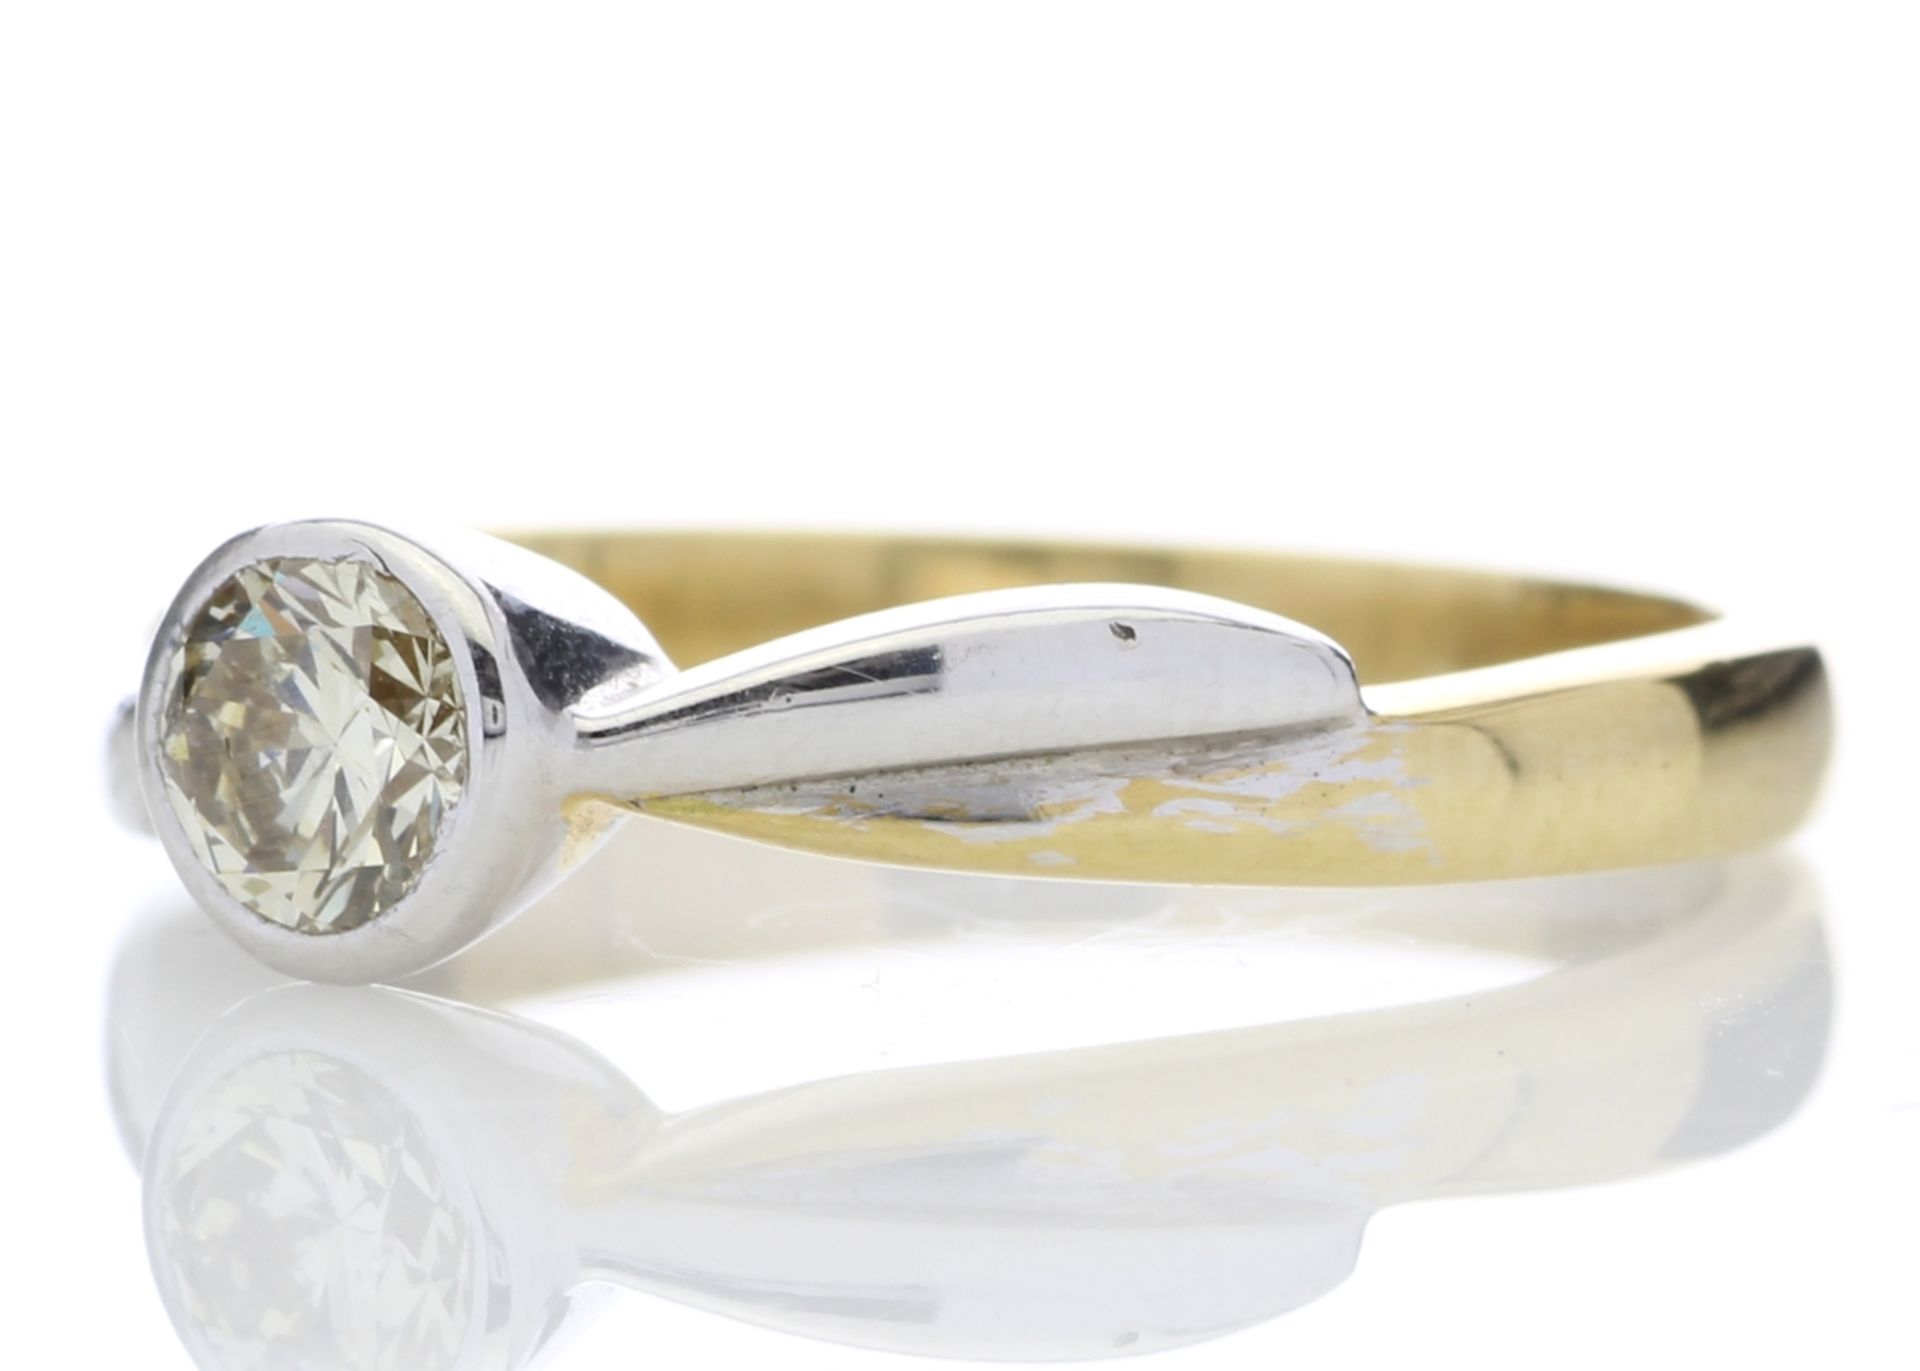 18ct Single Stone Rub Over Set Diamond Ring 0.45 Carats - Valued By GIE £8,895.00 - One natural - Image 2 of 5